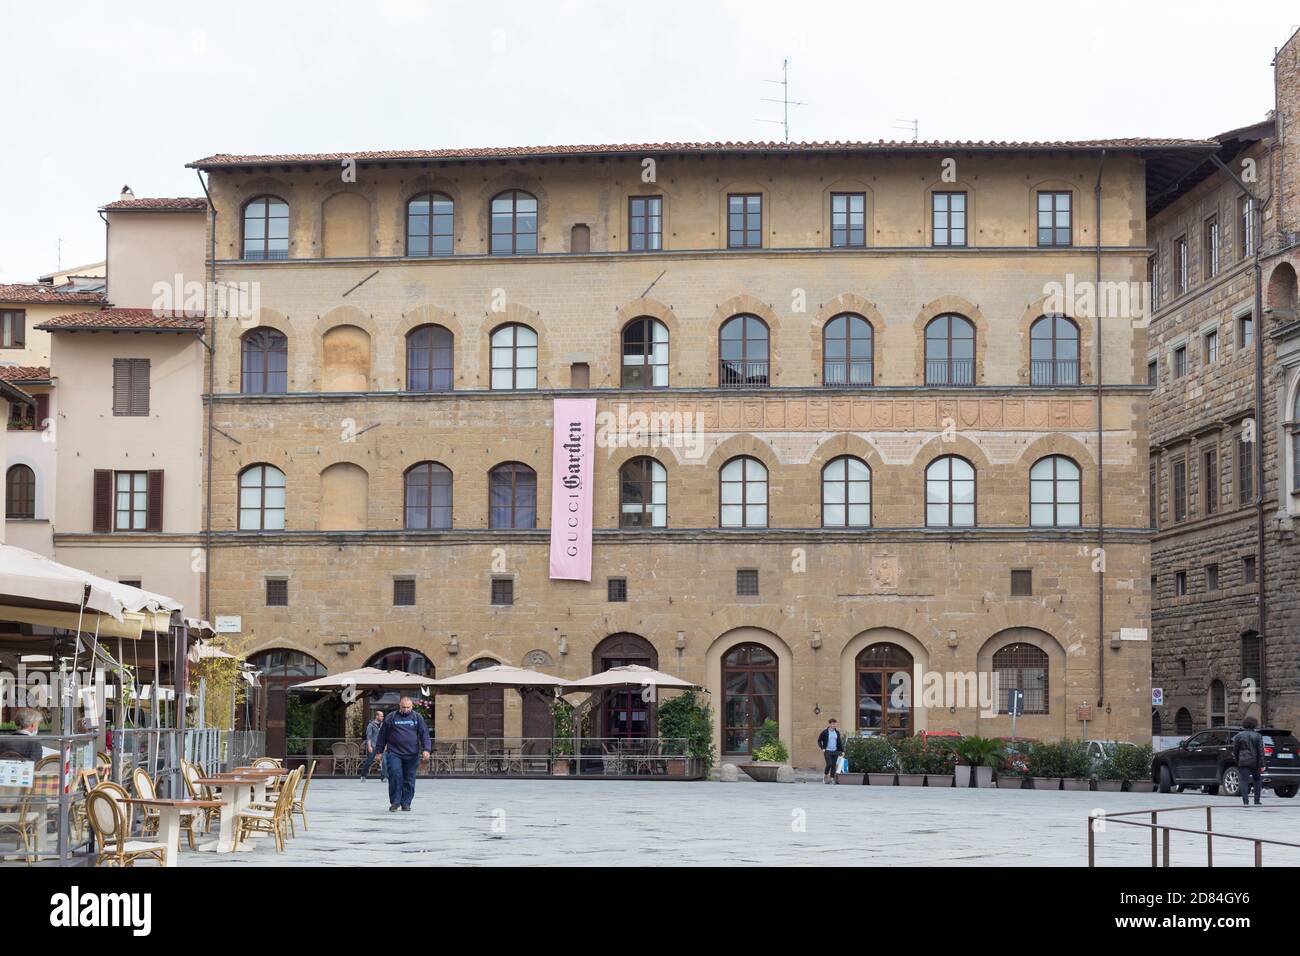 Firenze Museo Gucci High Resolution Stock Photography and Images - Alamy